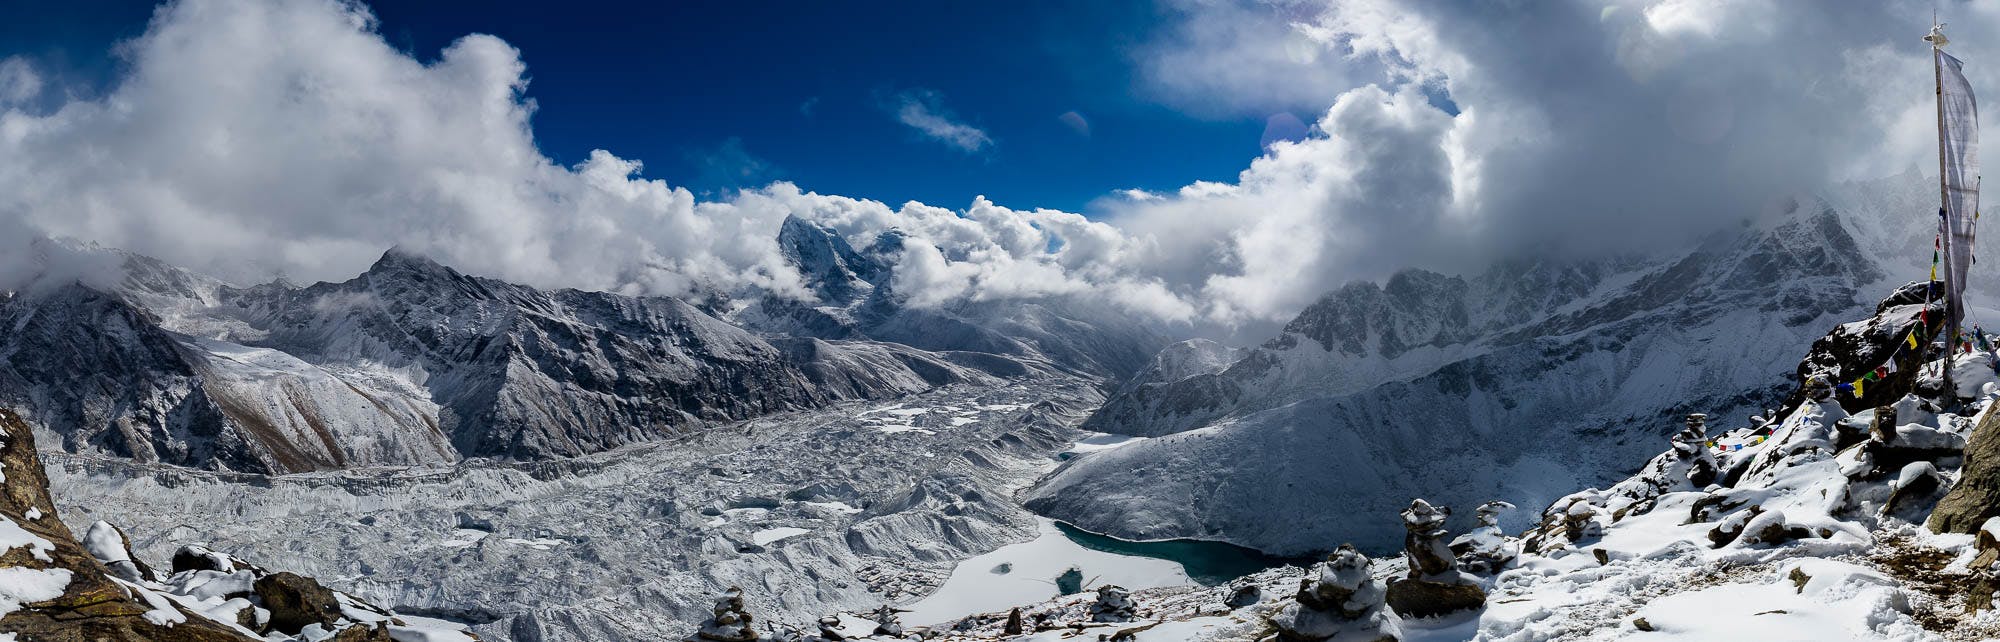 The view from the summit of Gokyo Ri in Nepal